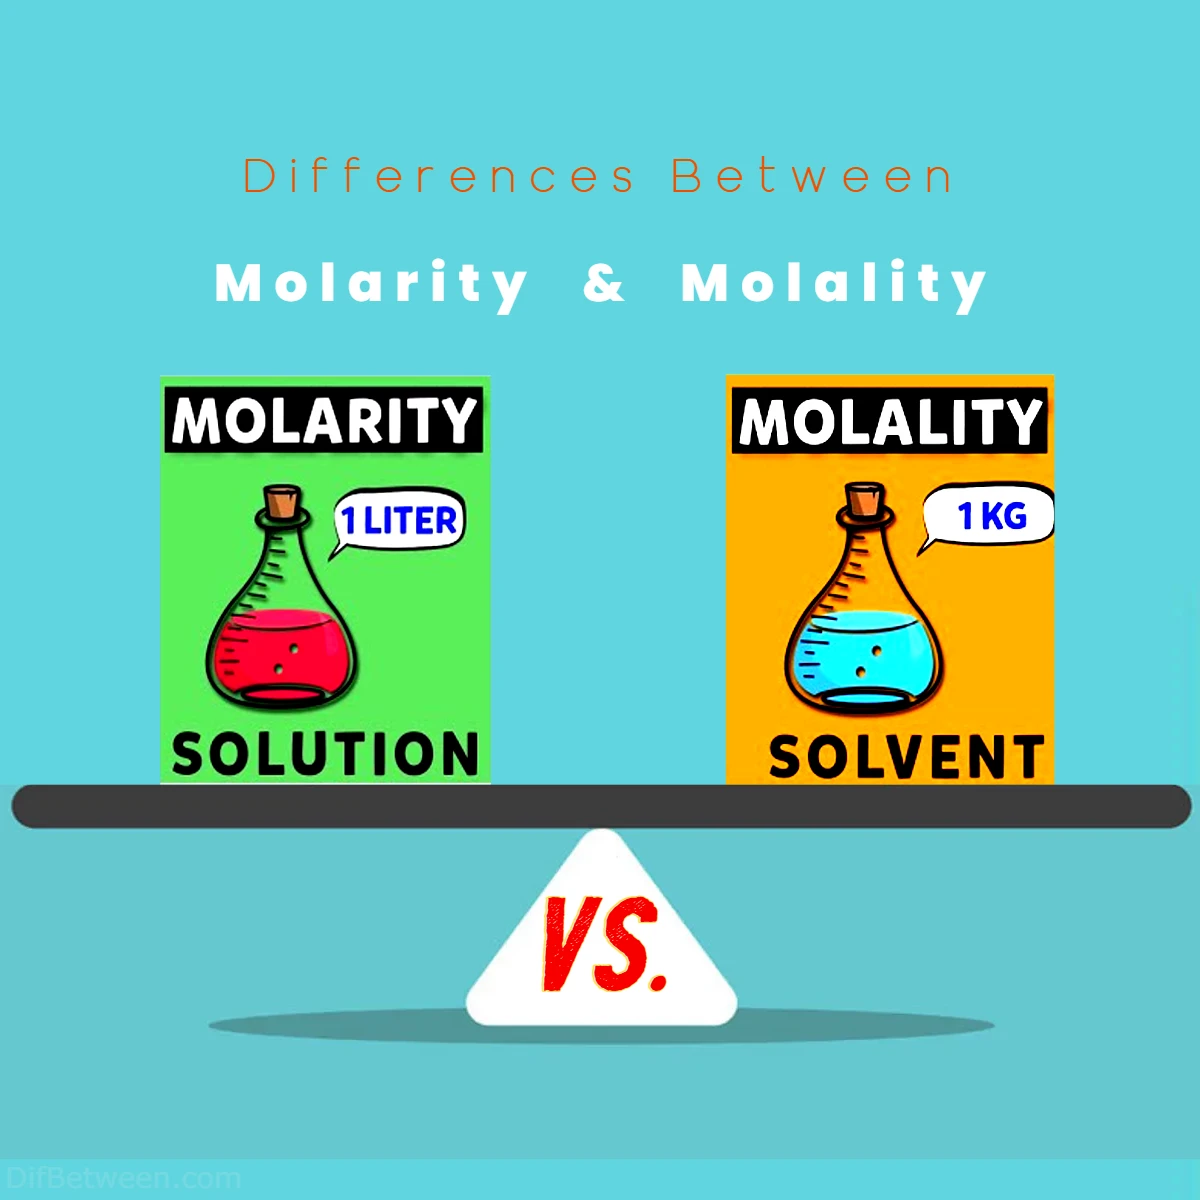 Differences Between Molarity vs Molality